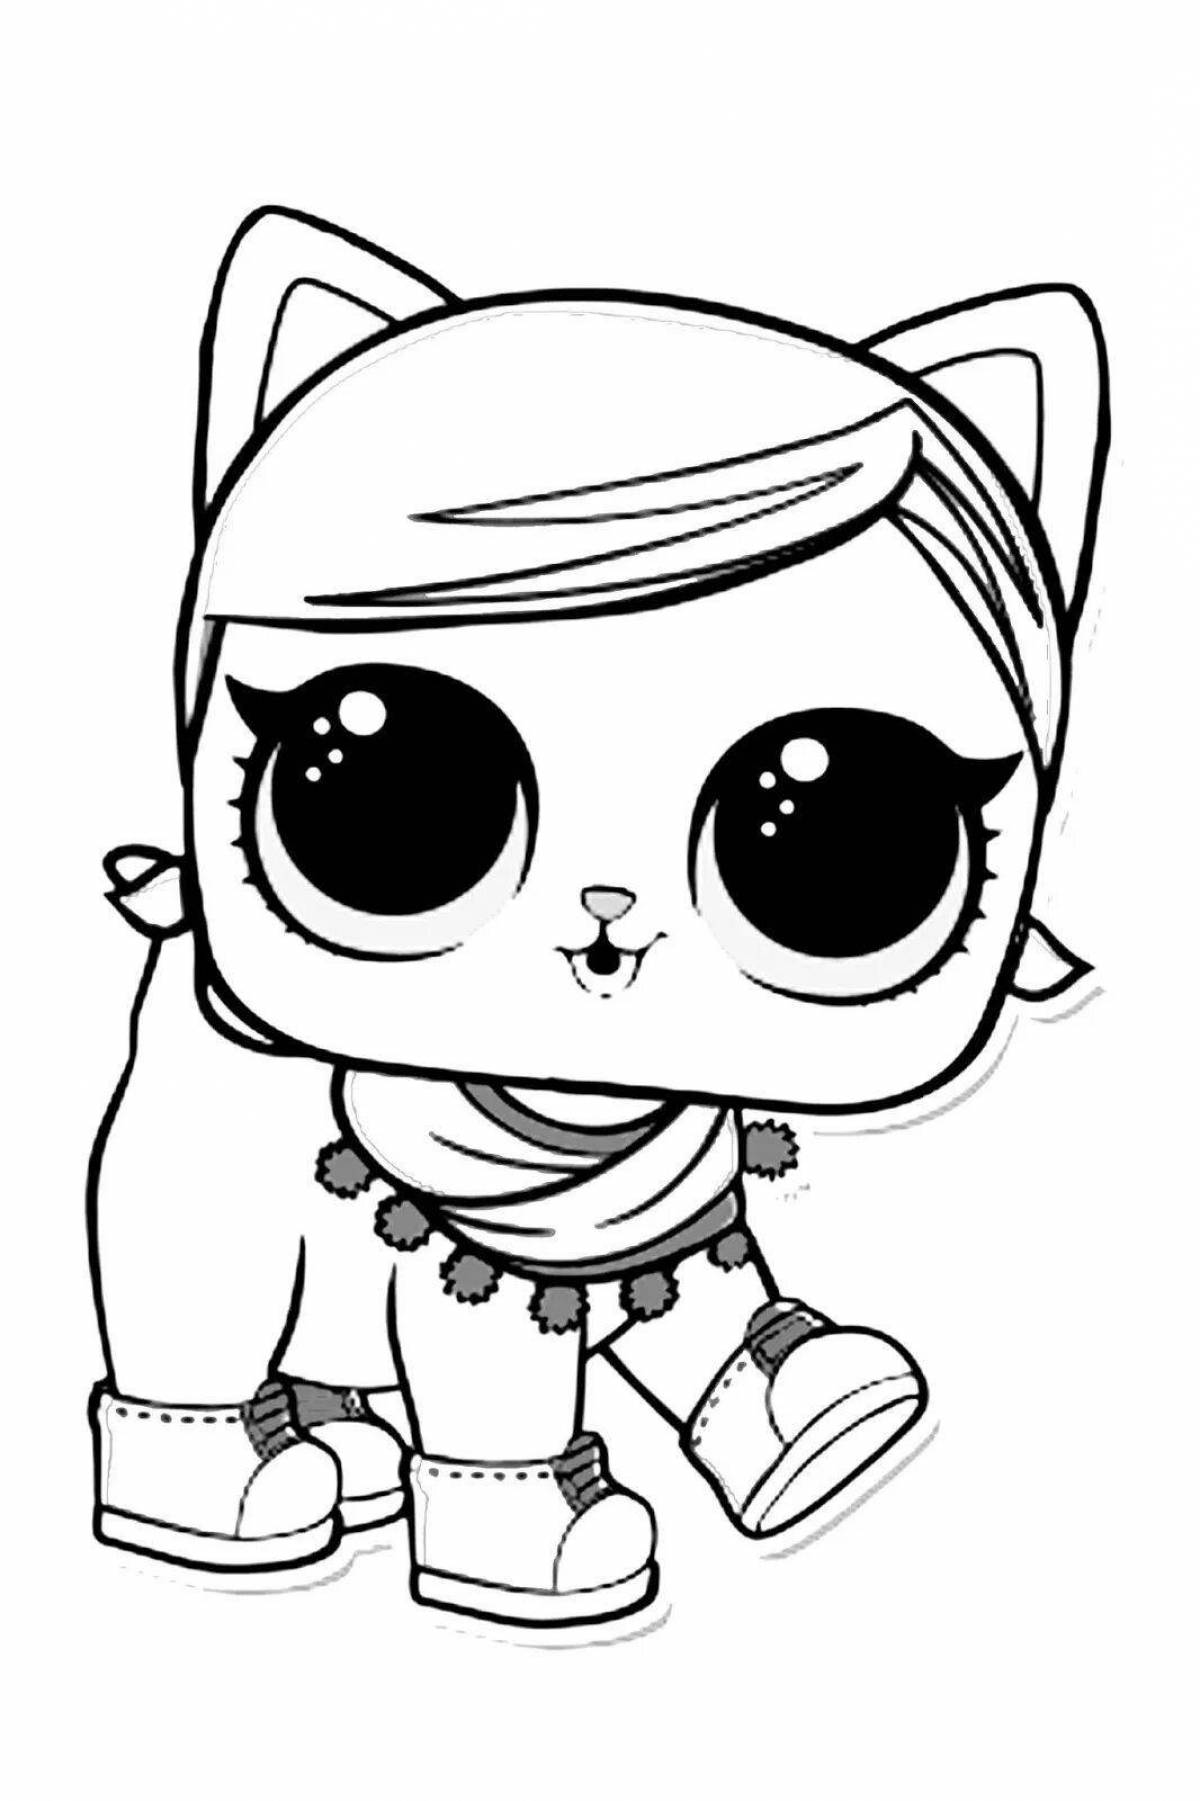 Cute cat baby coloring by anuki